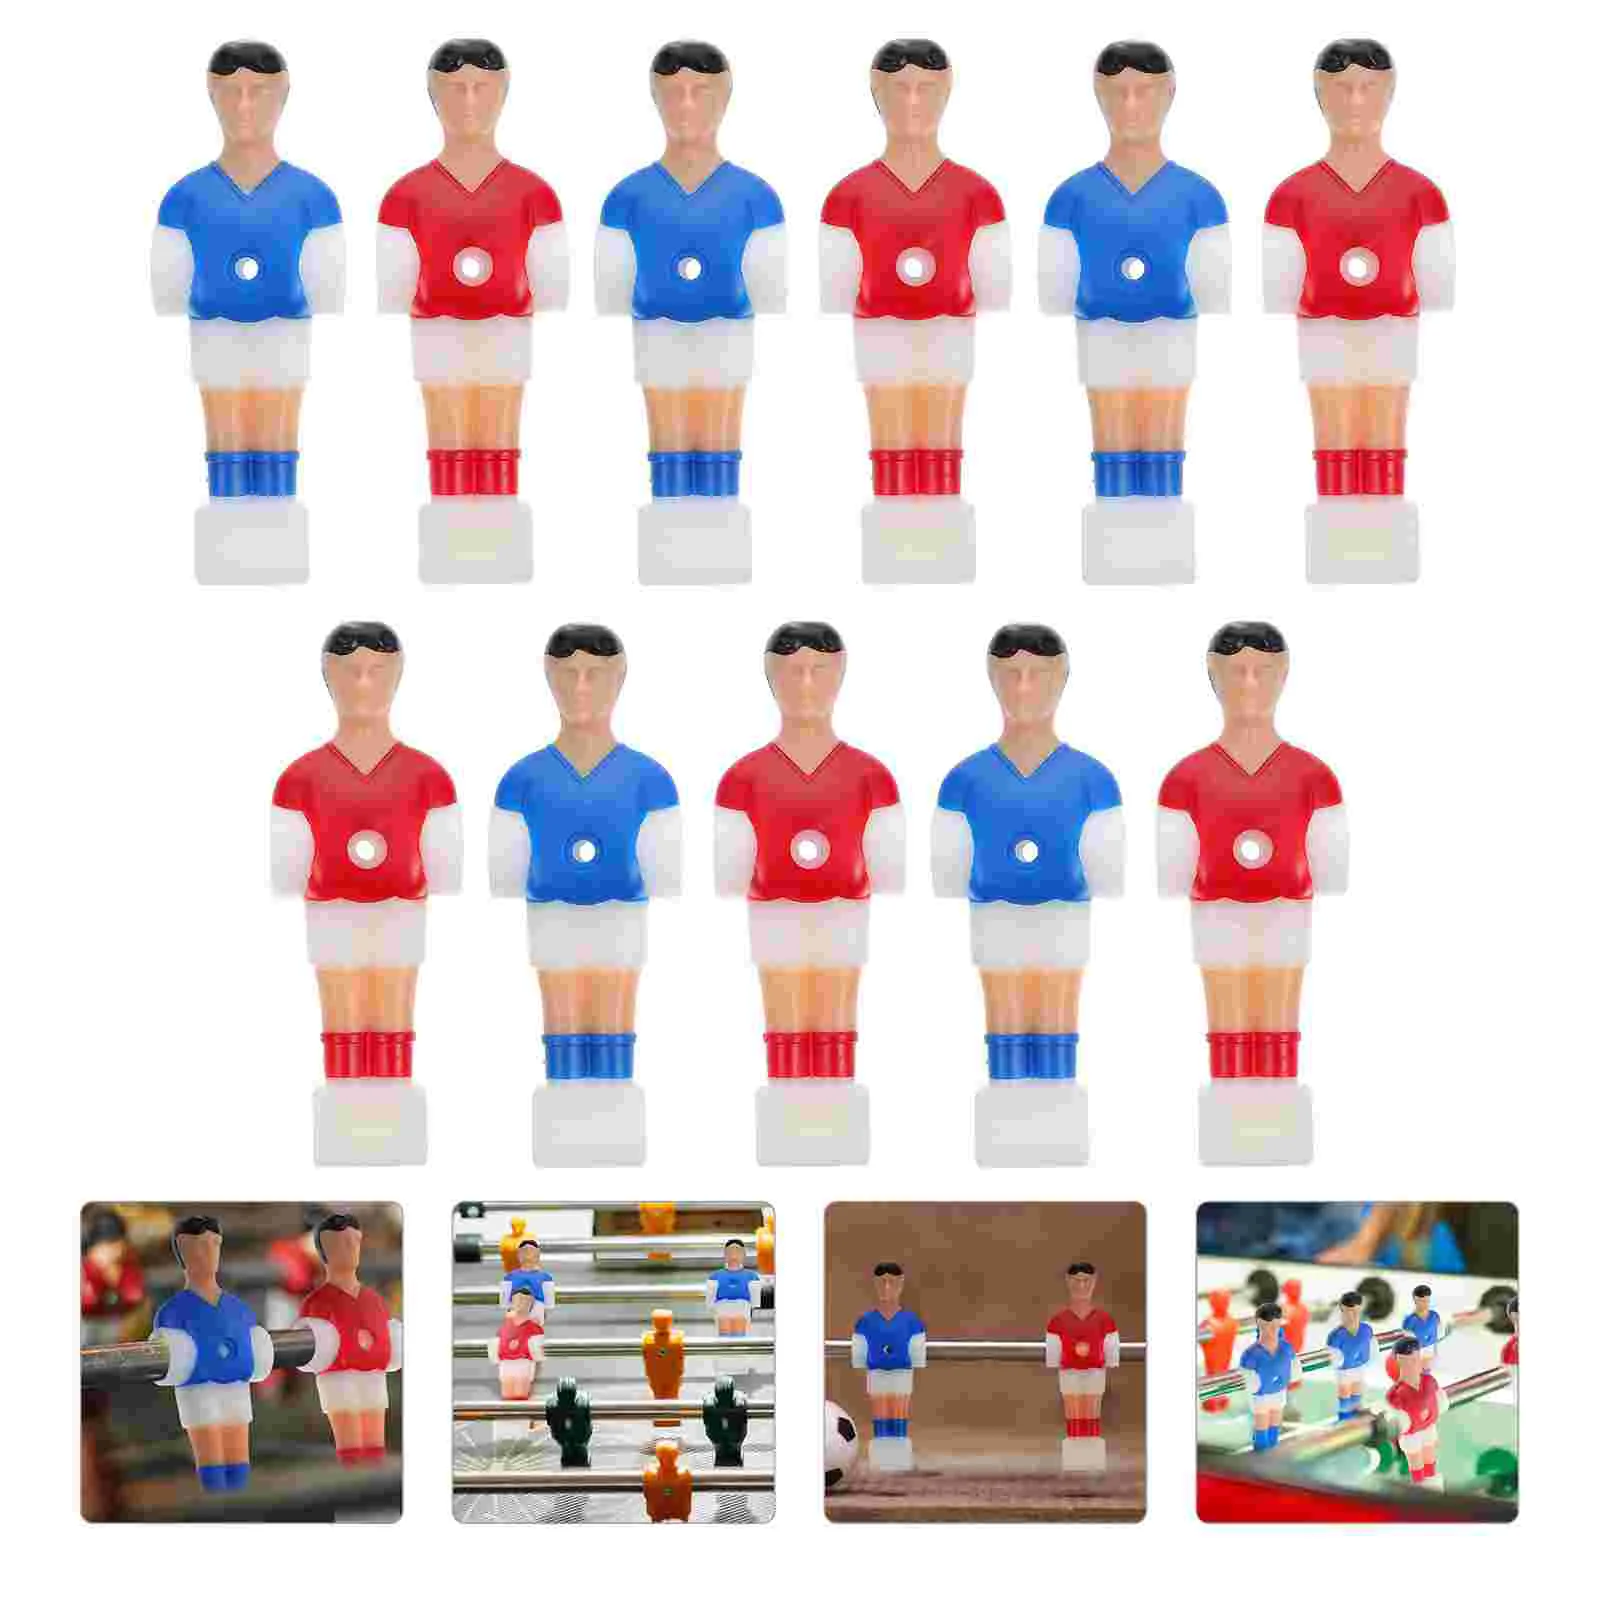 11 Pcs Man Football Machine Player Child Kids Soccer Figures Plastic Foosball Table Parts hot sale mini table top football board game set machine home match toy child soccer tables babyfoot mini table foosball table